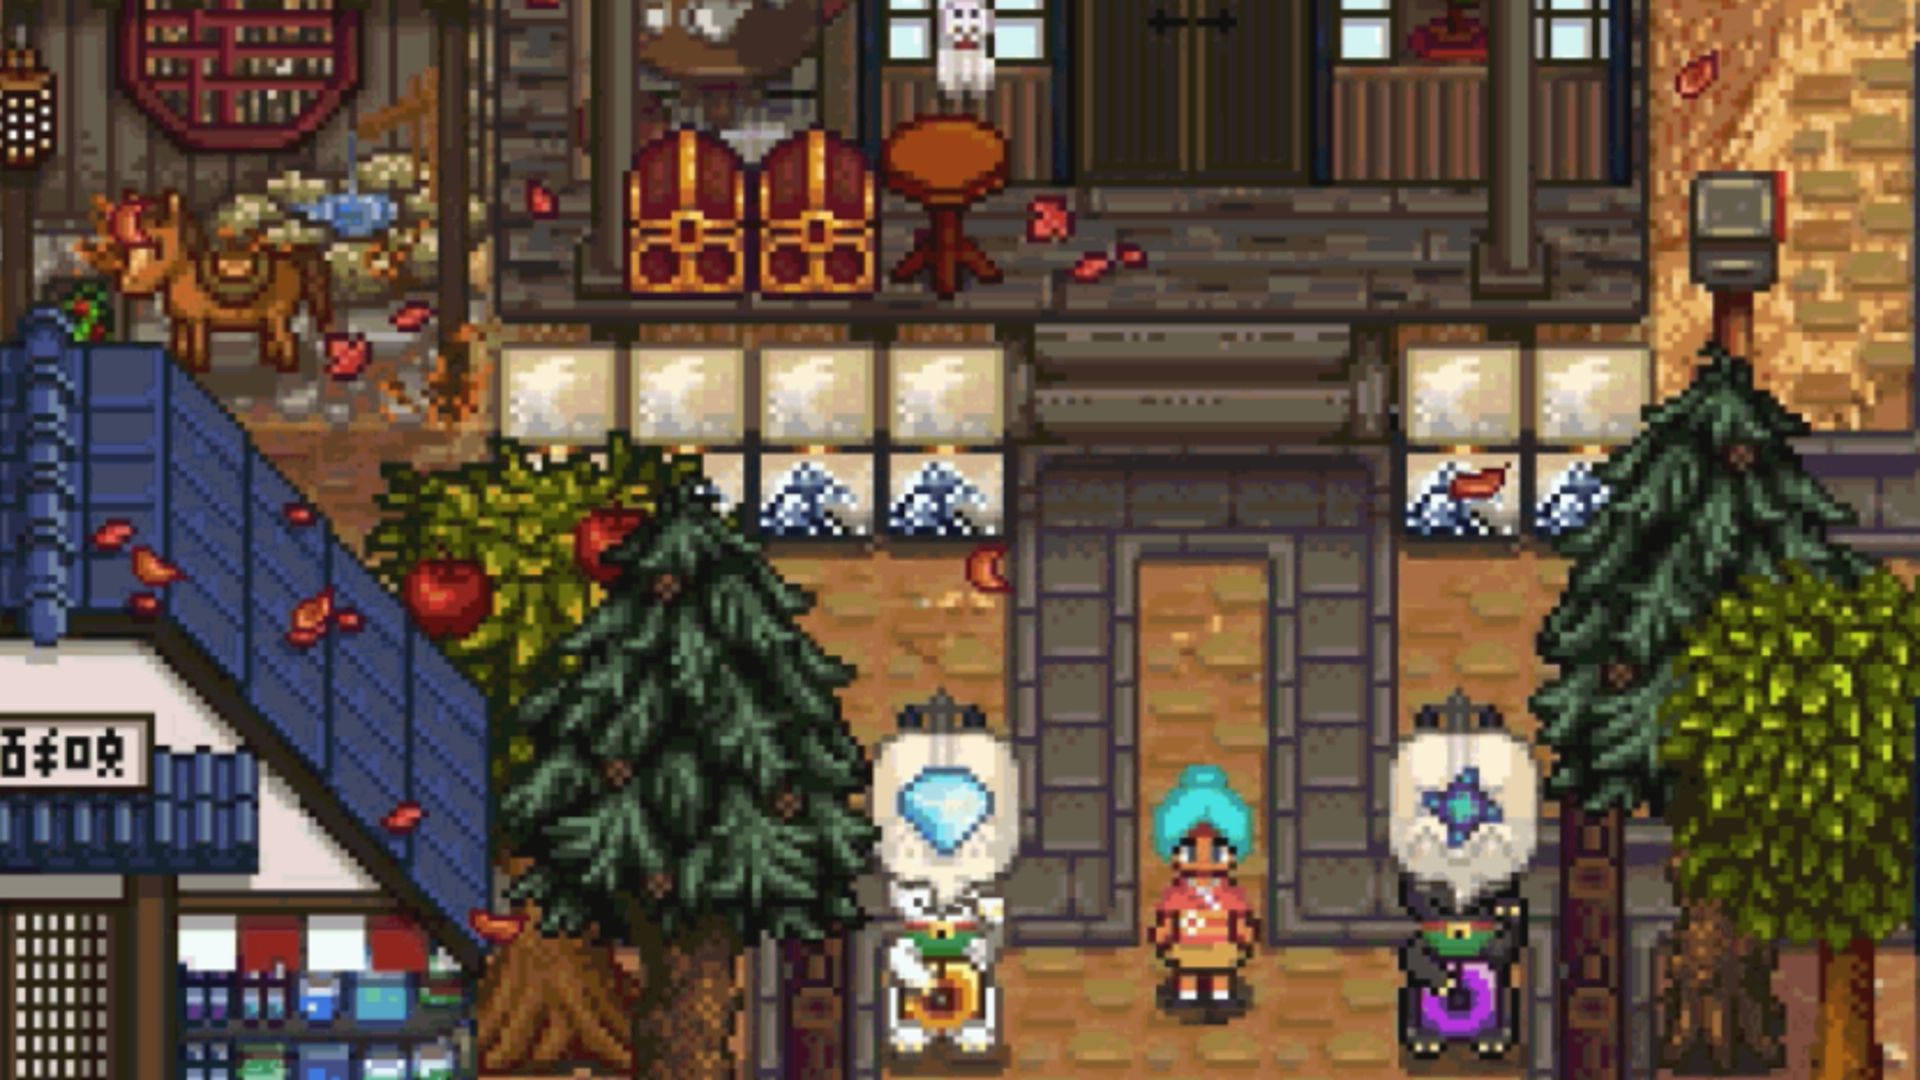 10 Coolest Things Modders Have Done For Stardew Valley | Digiskygames.com